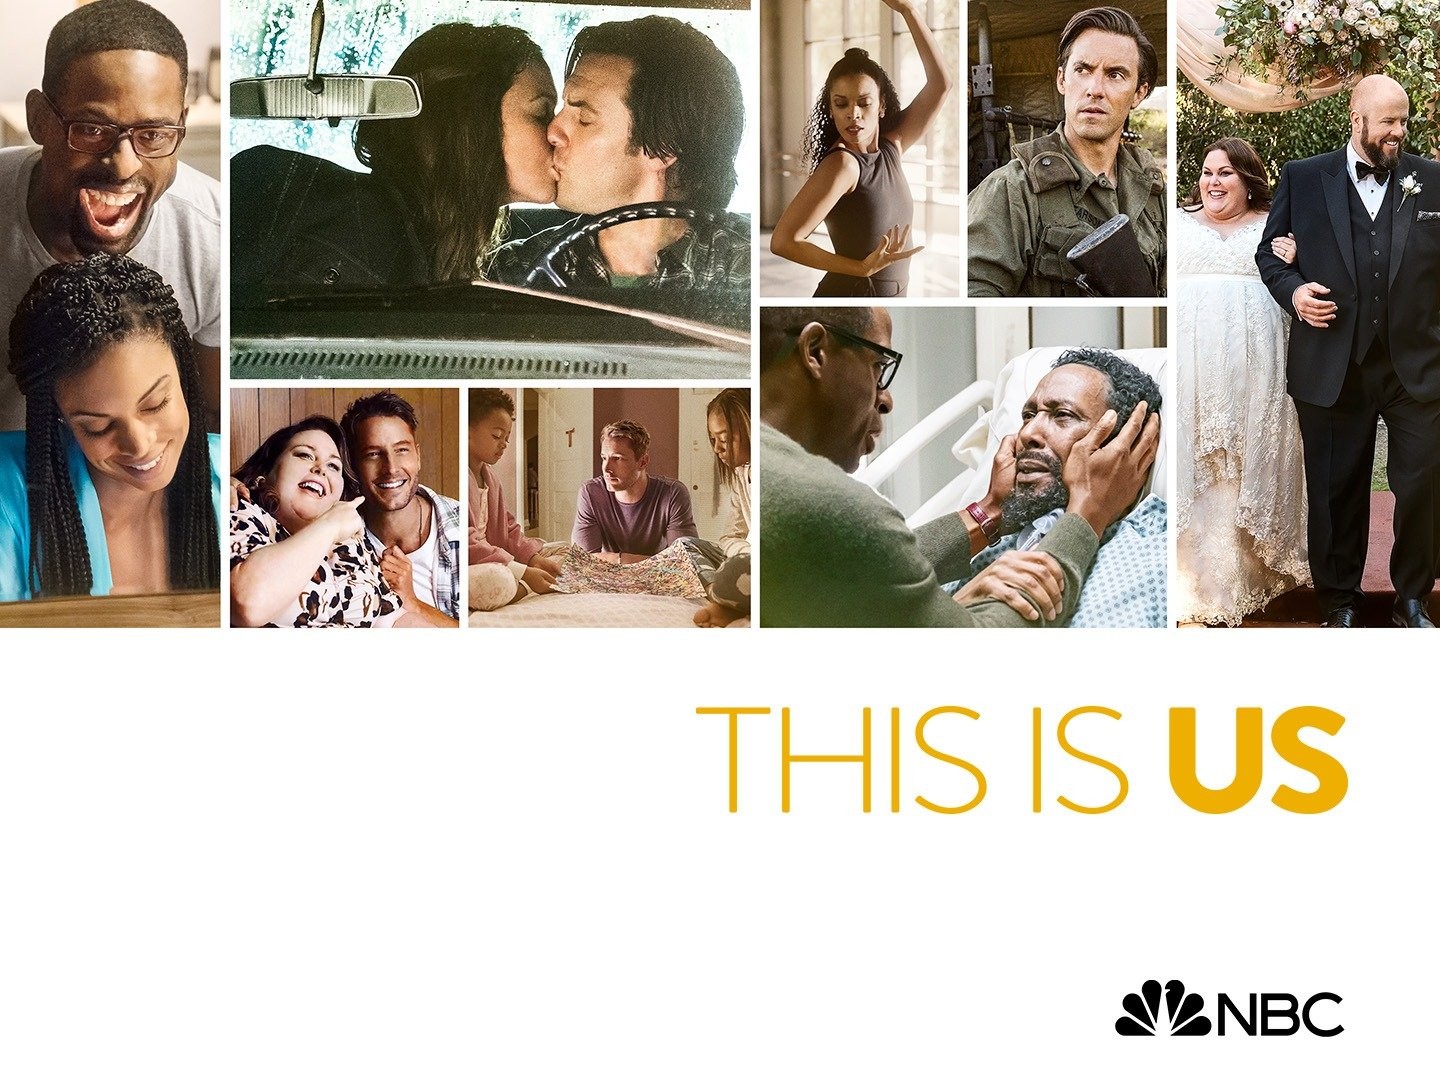 This Is Us' on Netflix: Cast, Streaming Release Date, Synopsis